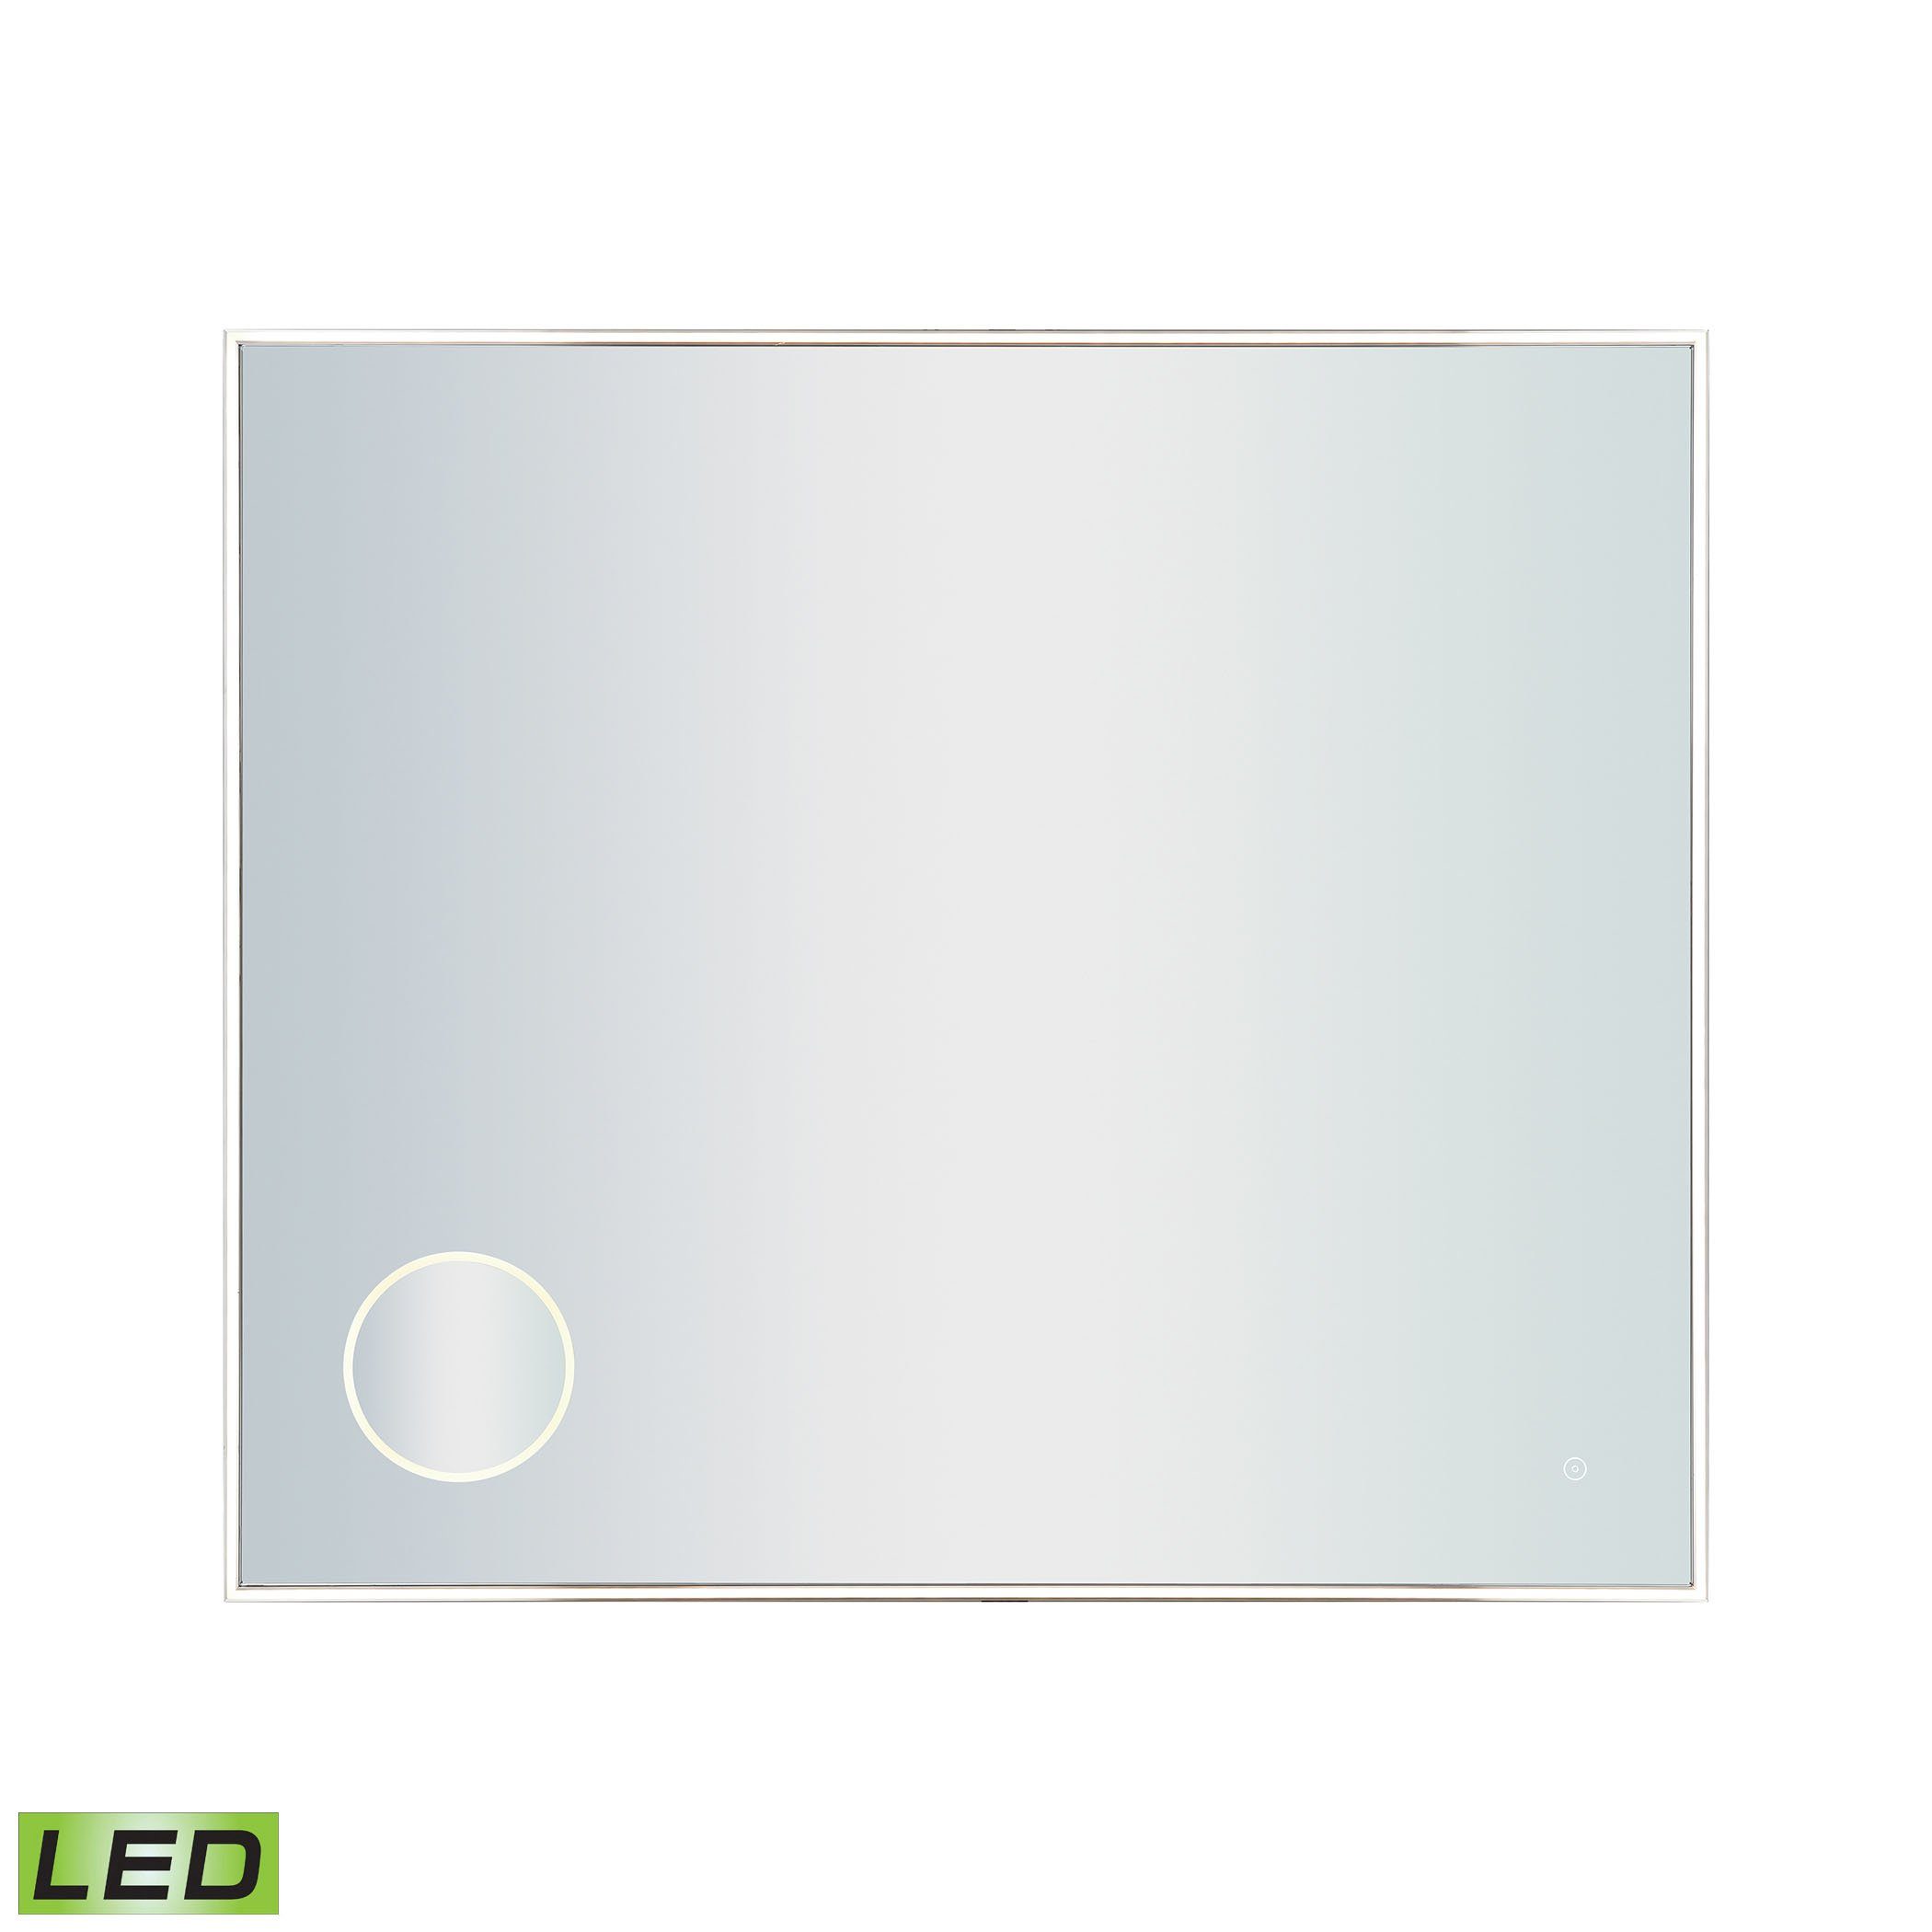 42x36-inch LED Mirror with 3x Magnifier Mirrors Ryvyr 